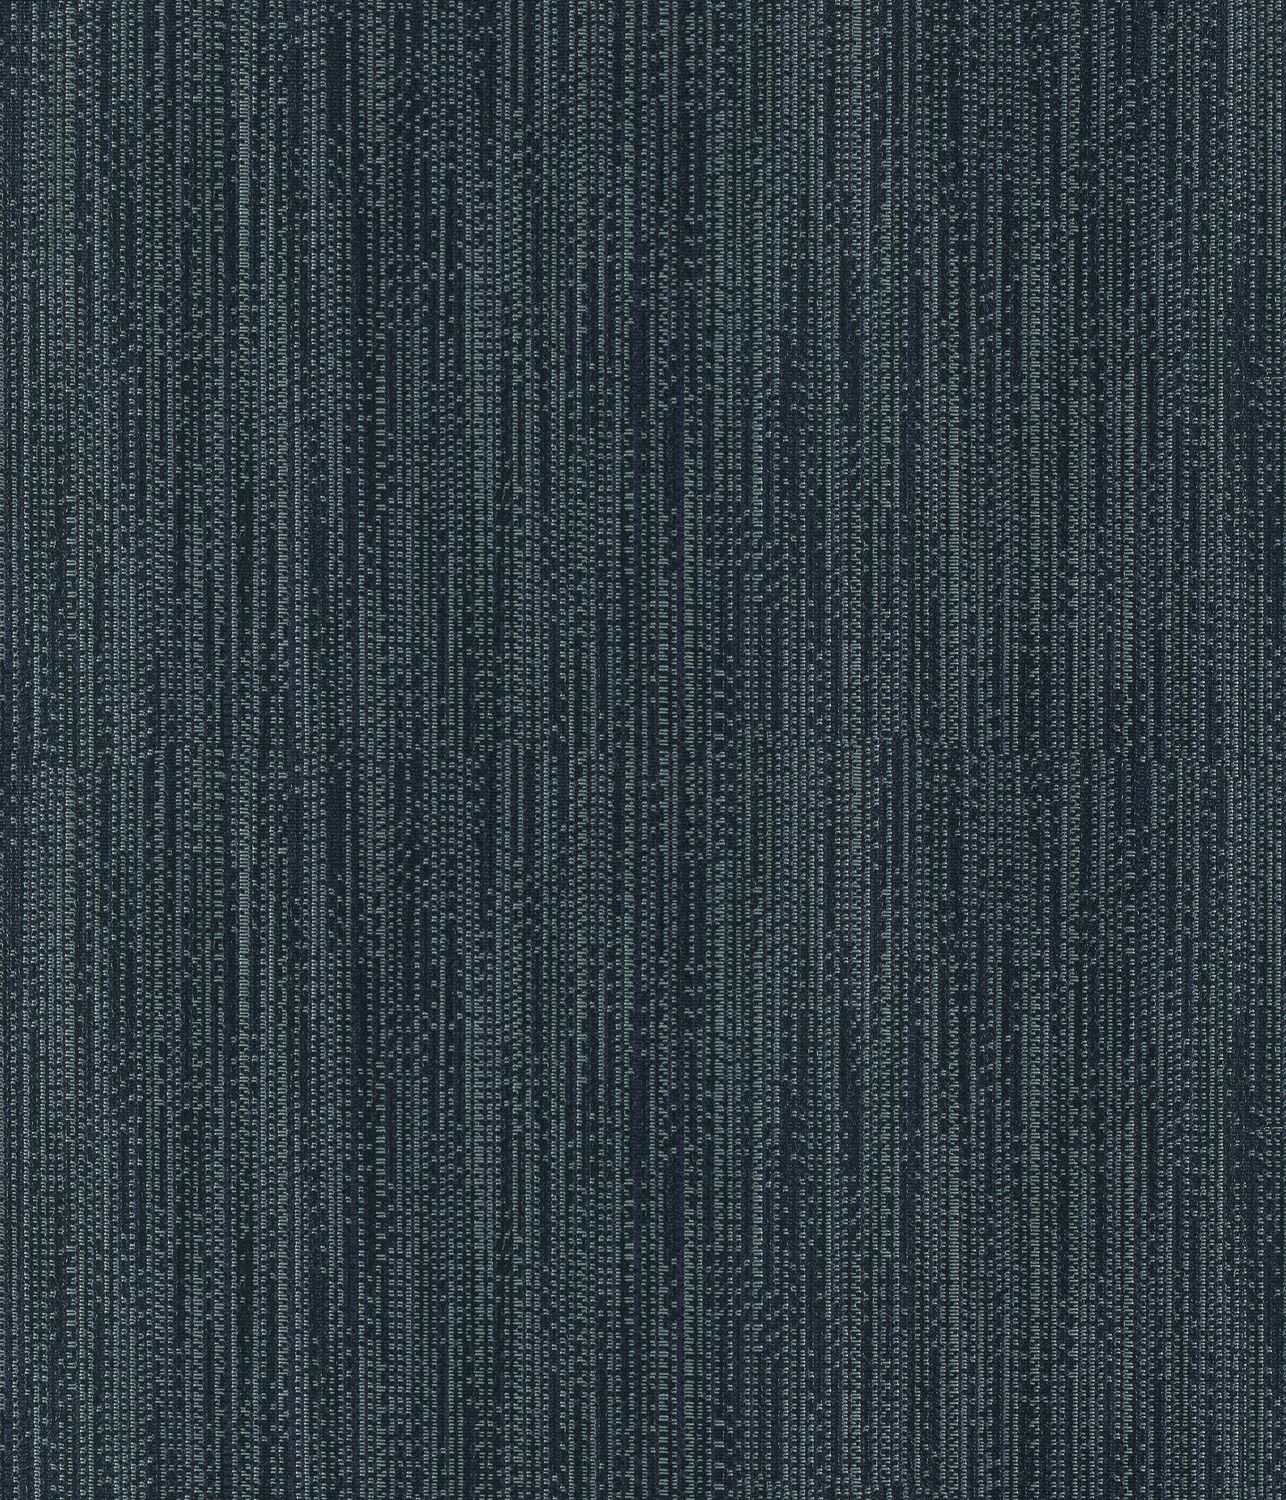 Graticule - Alidade - 7018 - 08 Tileable Swatches